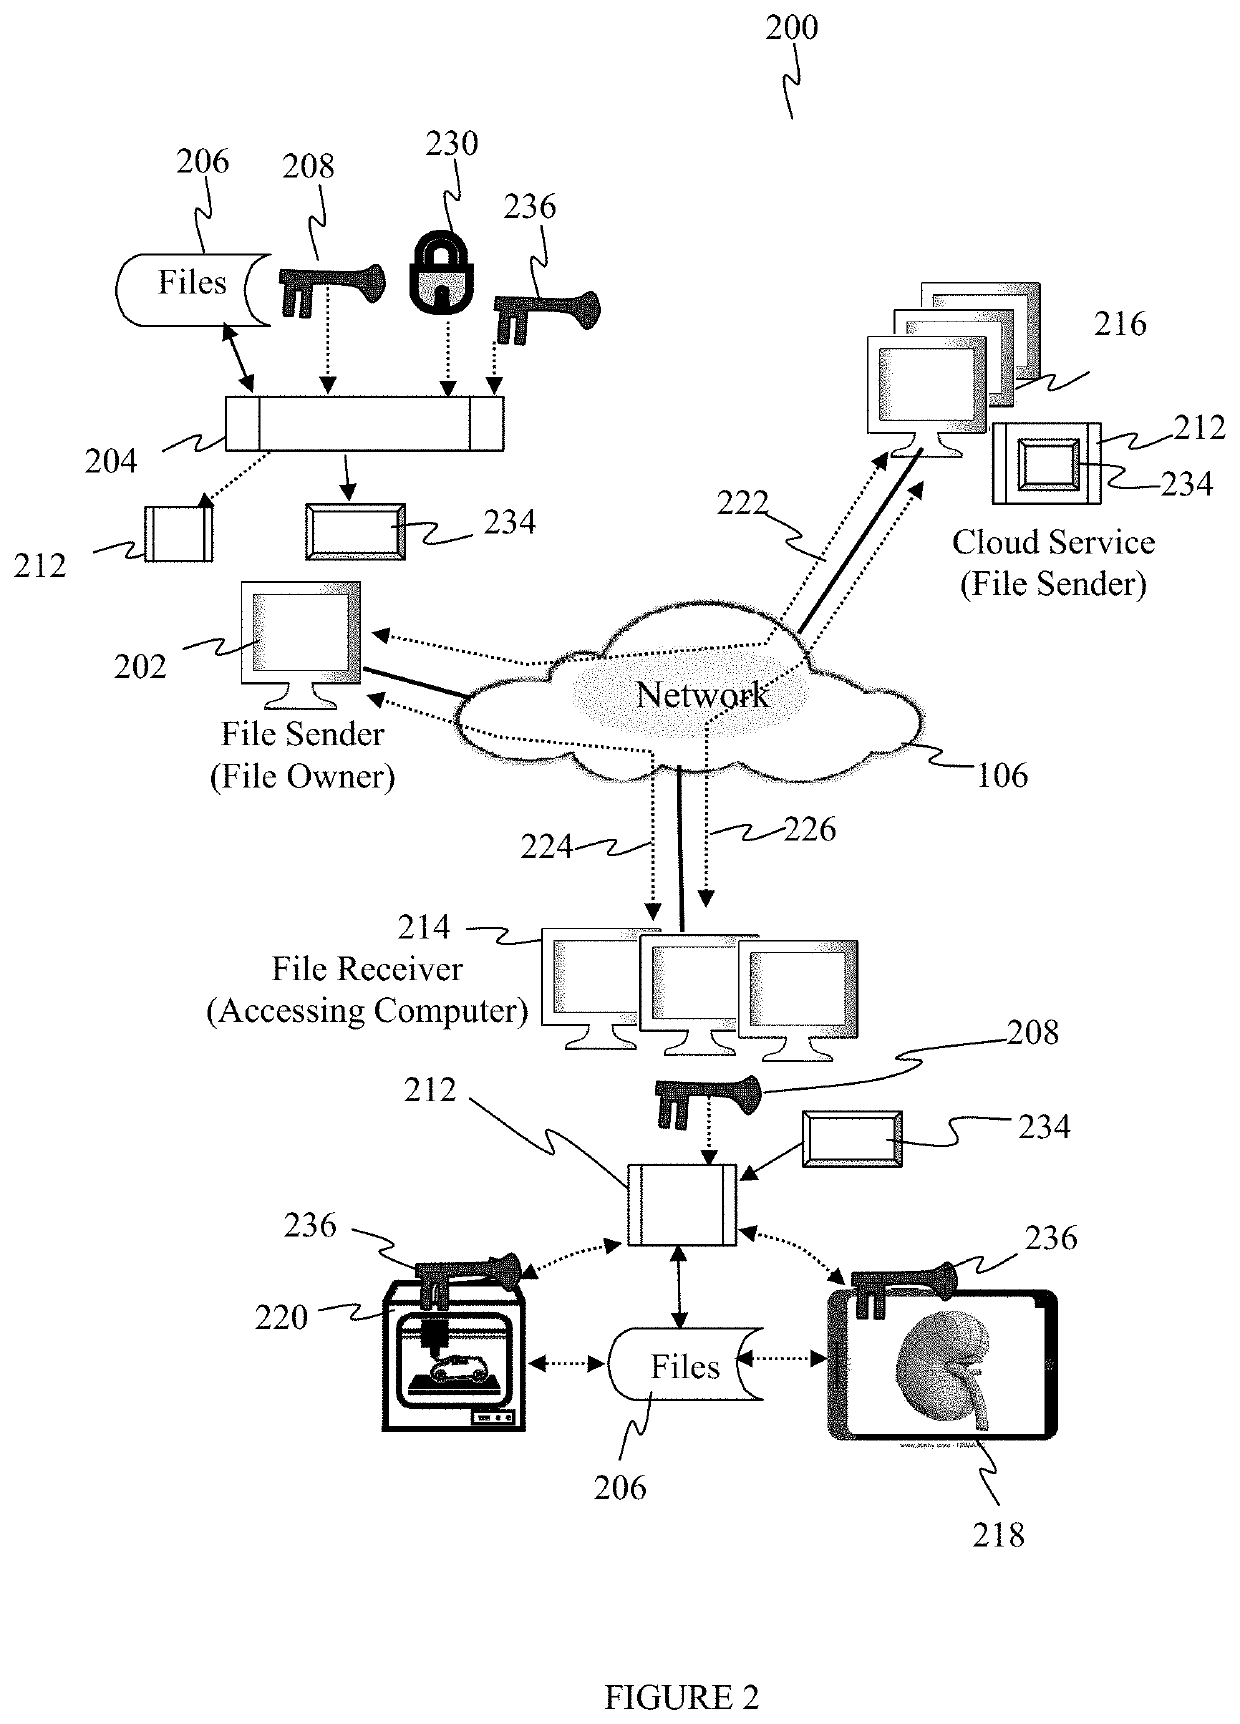 Systems, devices and methods for protecting and exchanging electronic computer files